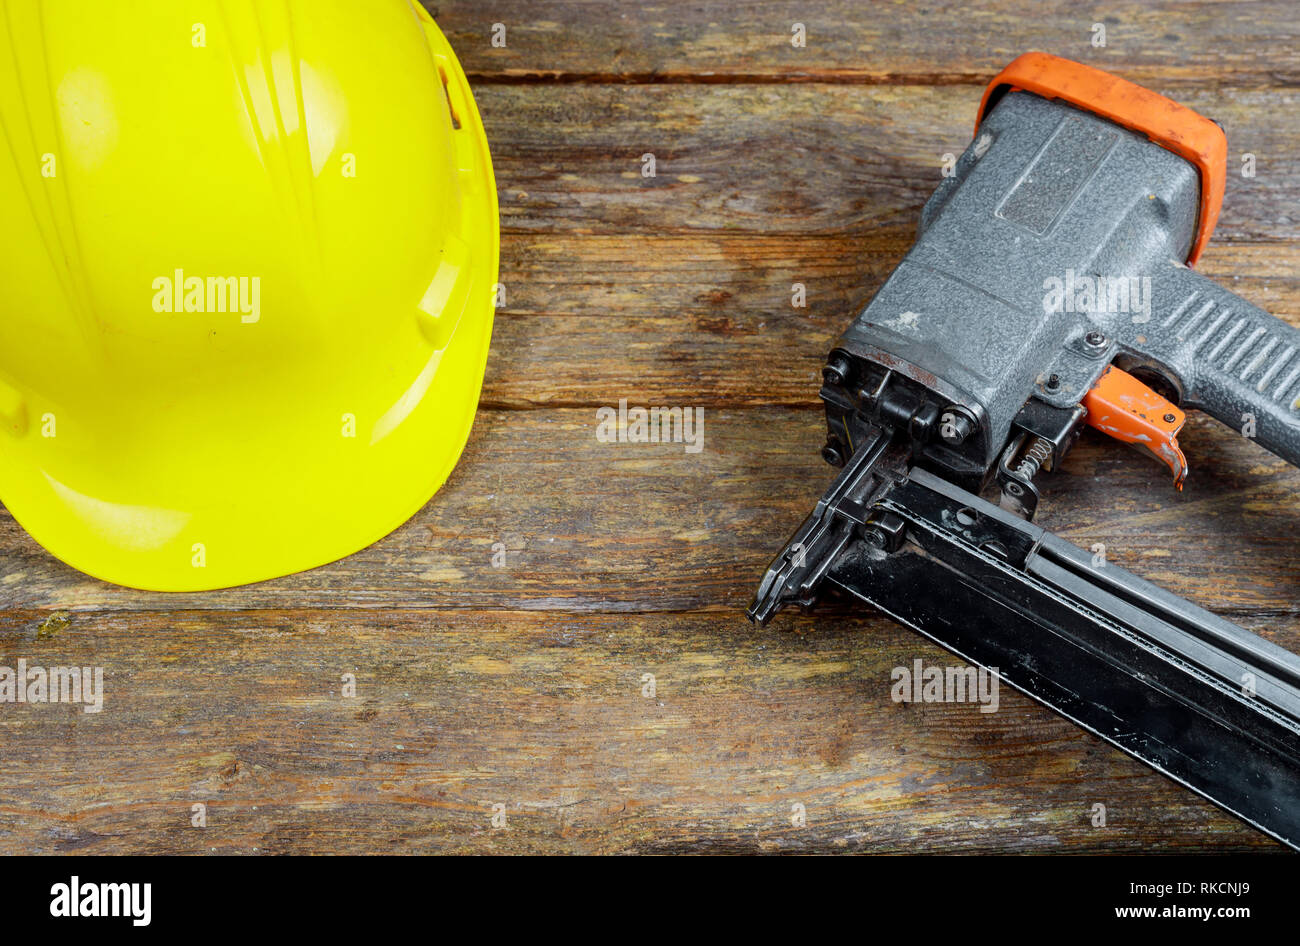 802 Air Nailer Images, Stock Photos, 3D objects, & Vectors | Shutterstock